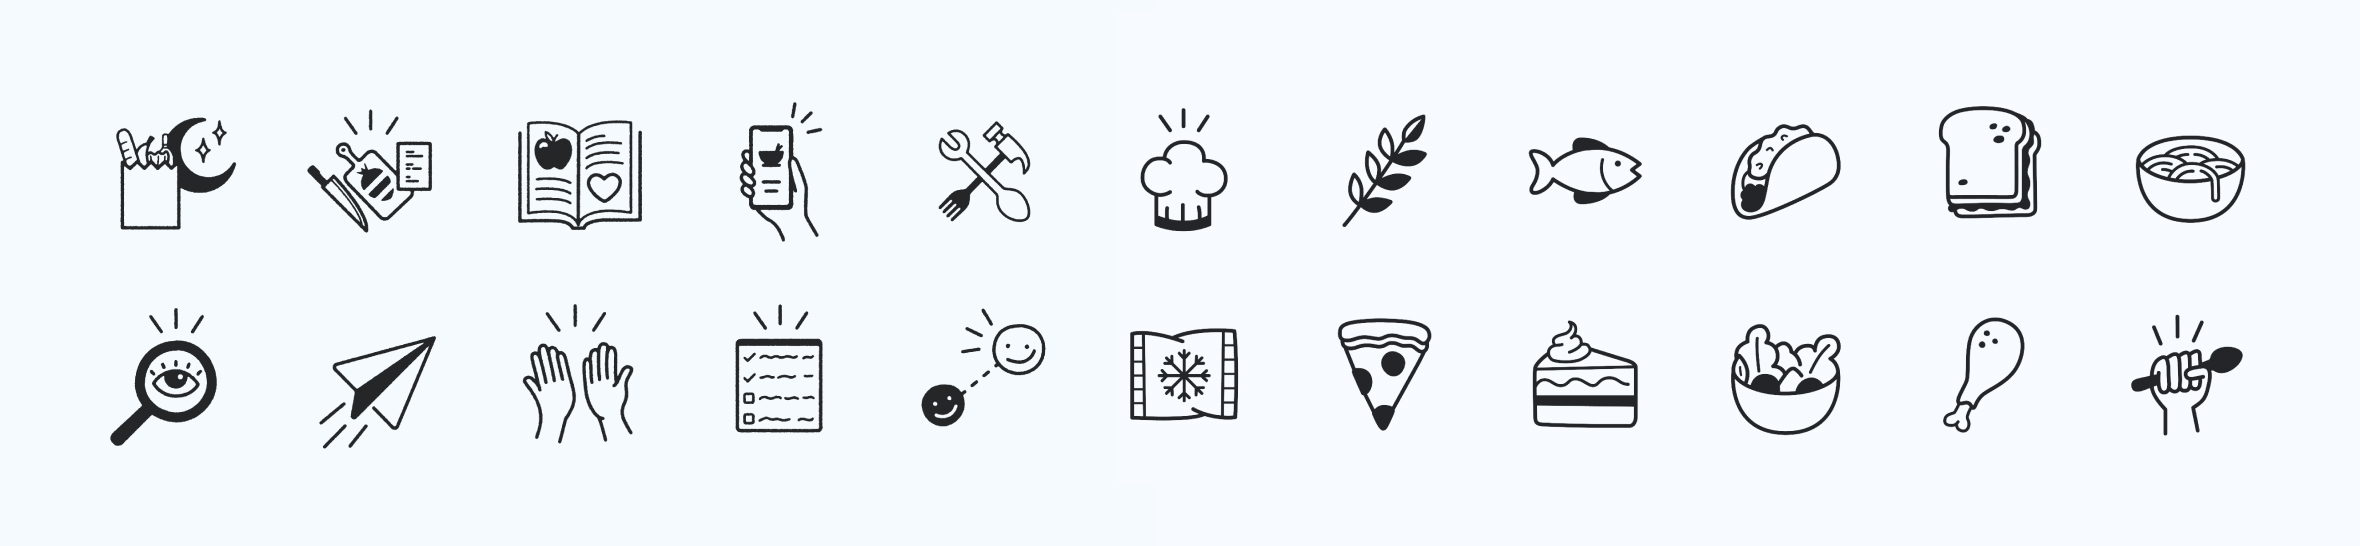 Icon illustrations for Mealhero